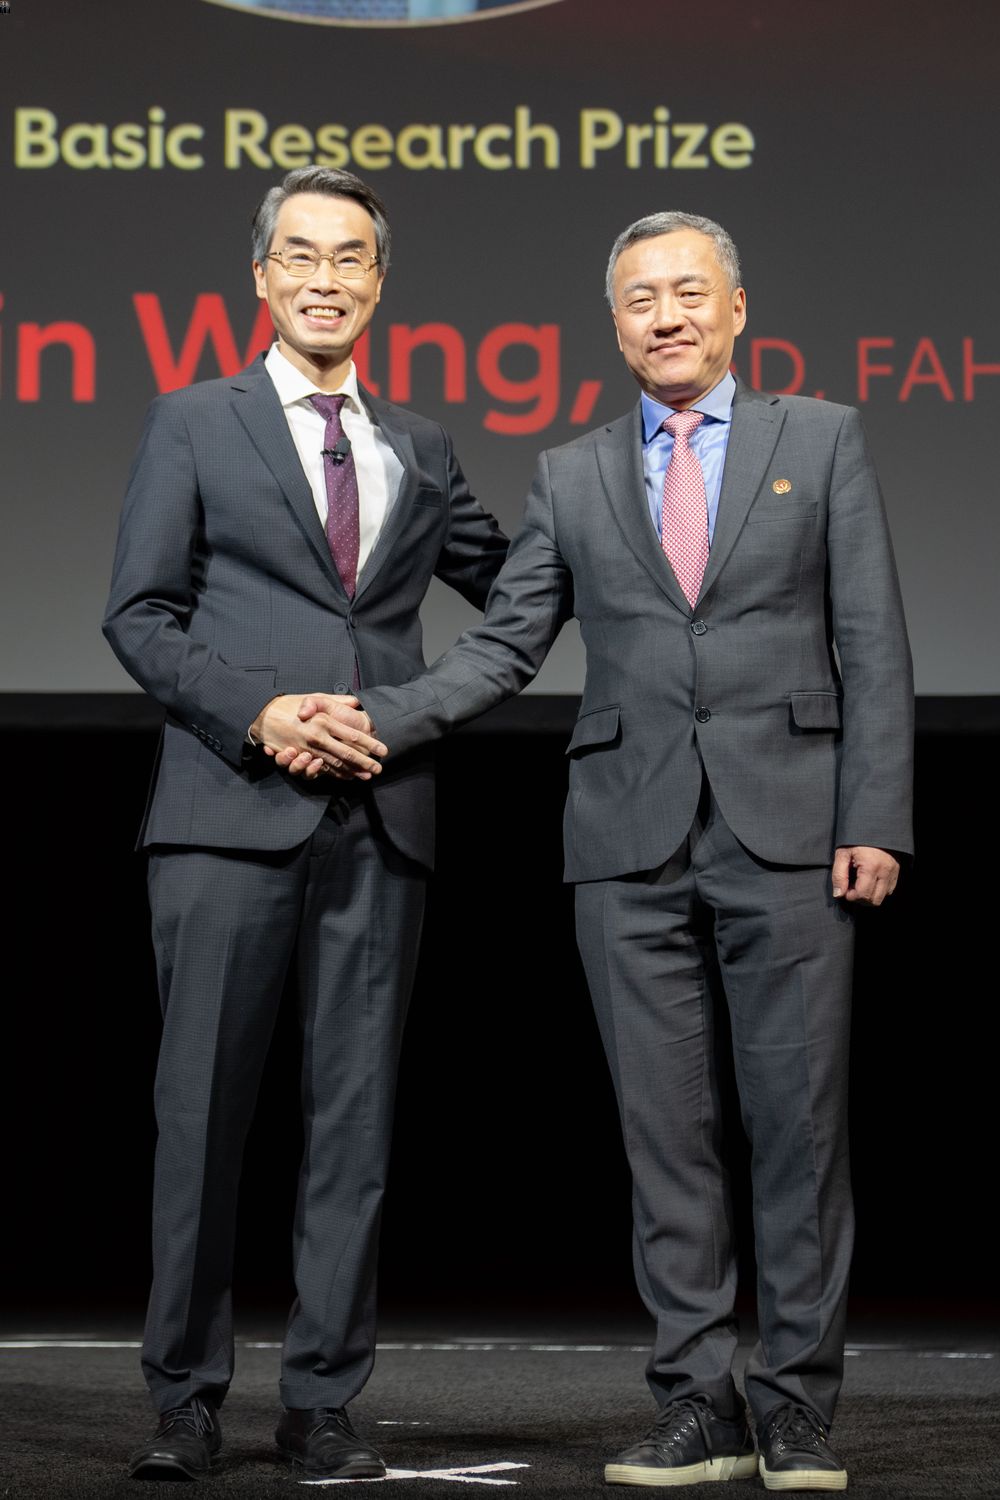 Wang Yibin, right, accepts the American Heart Association&#39;s Basic Research Prize 2023 on stage during the Association&#39;s annual conference